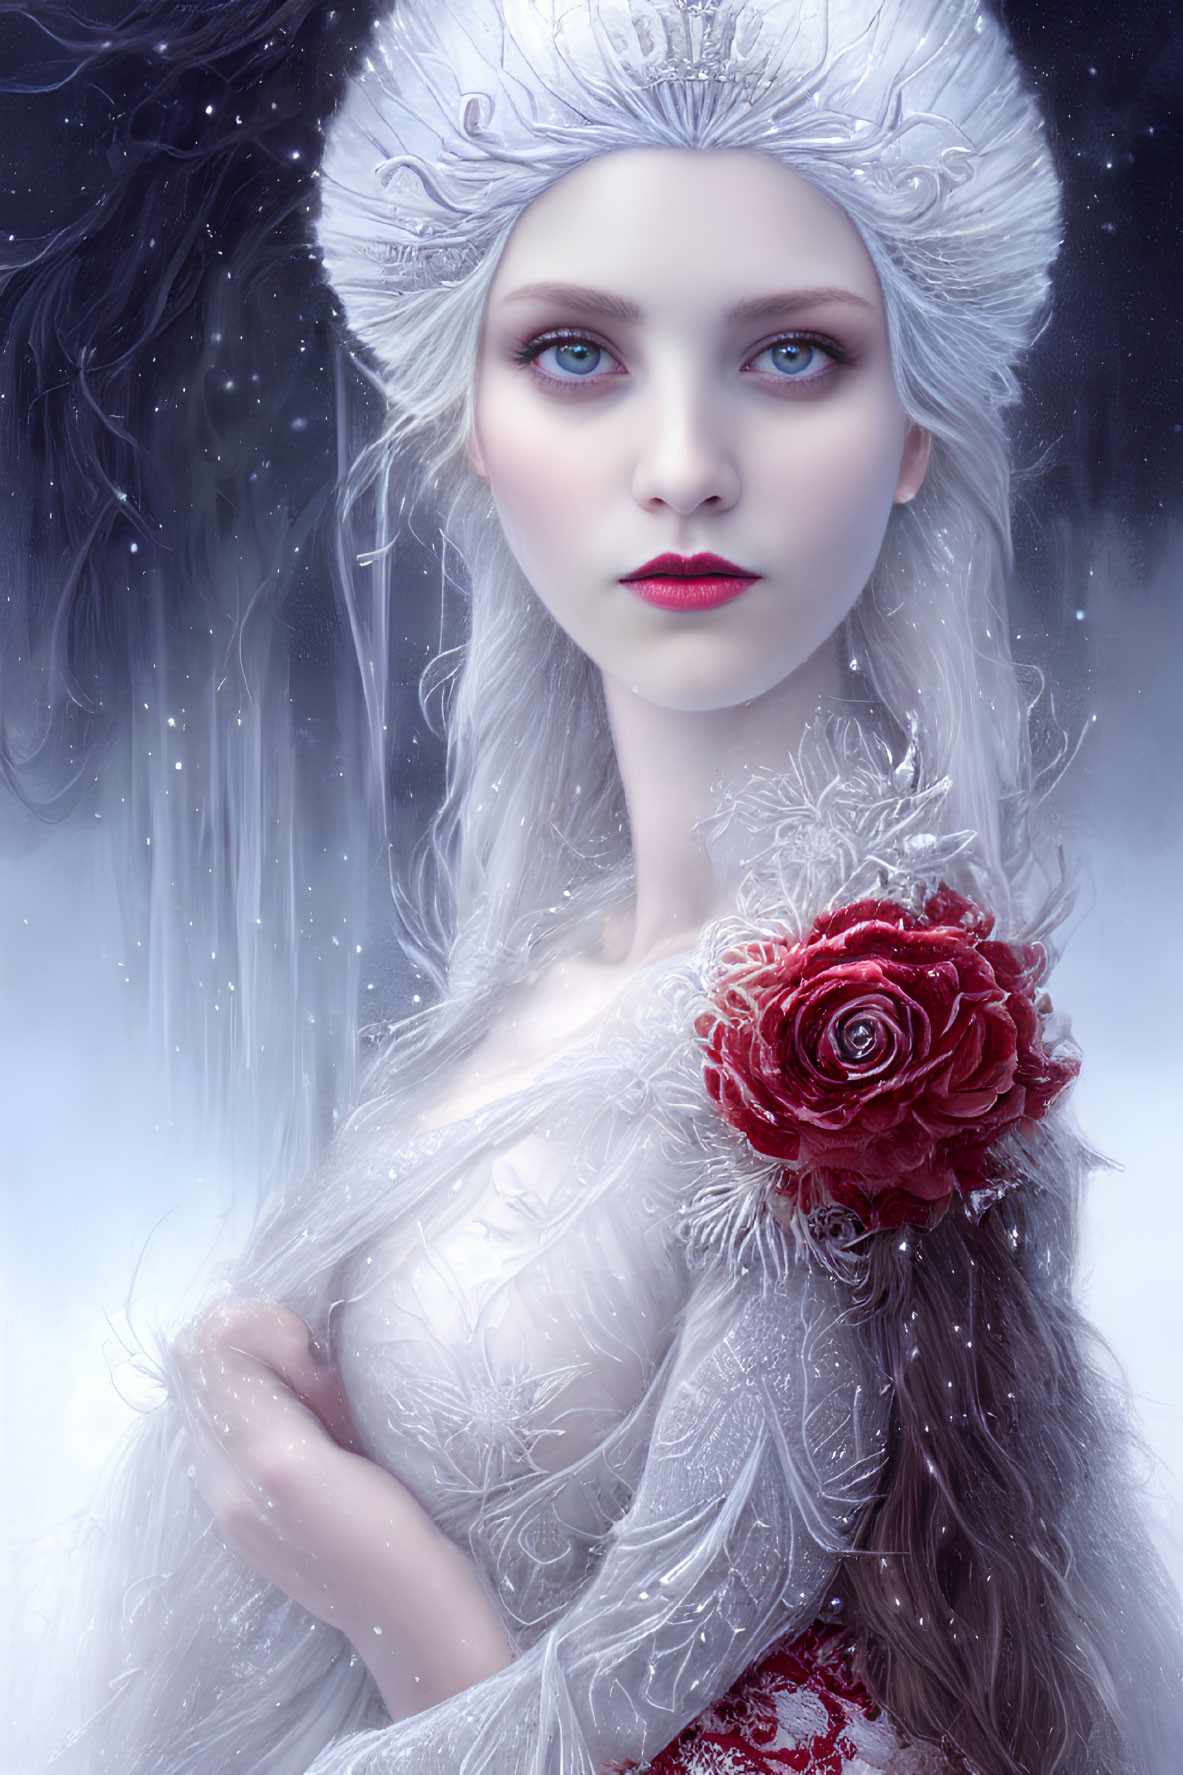 Pale-skinned woman with icy blue eyes and black hair in ornate headdress holding red rose in